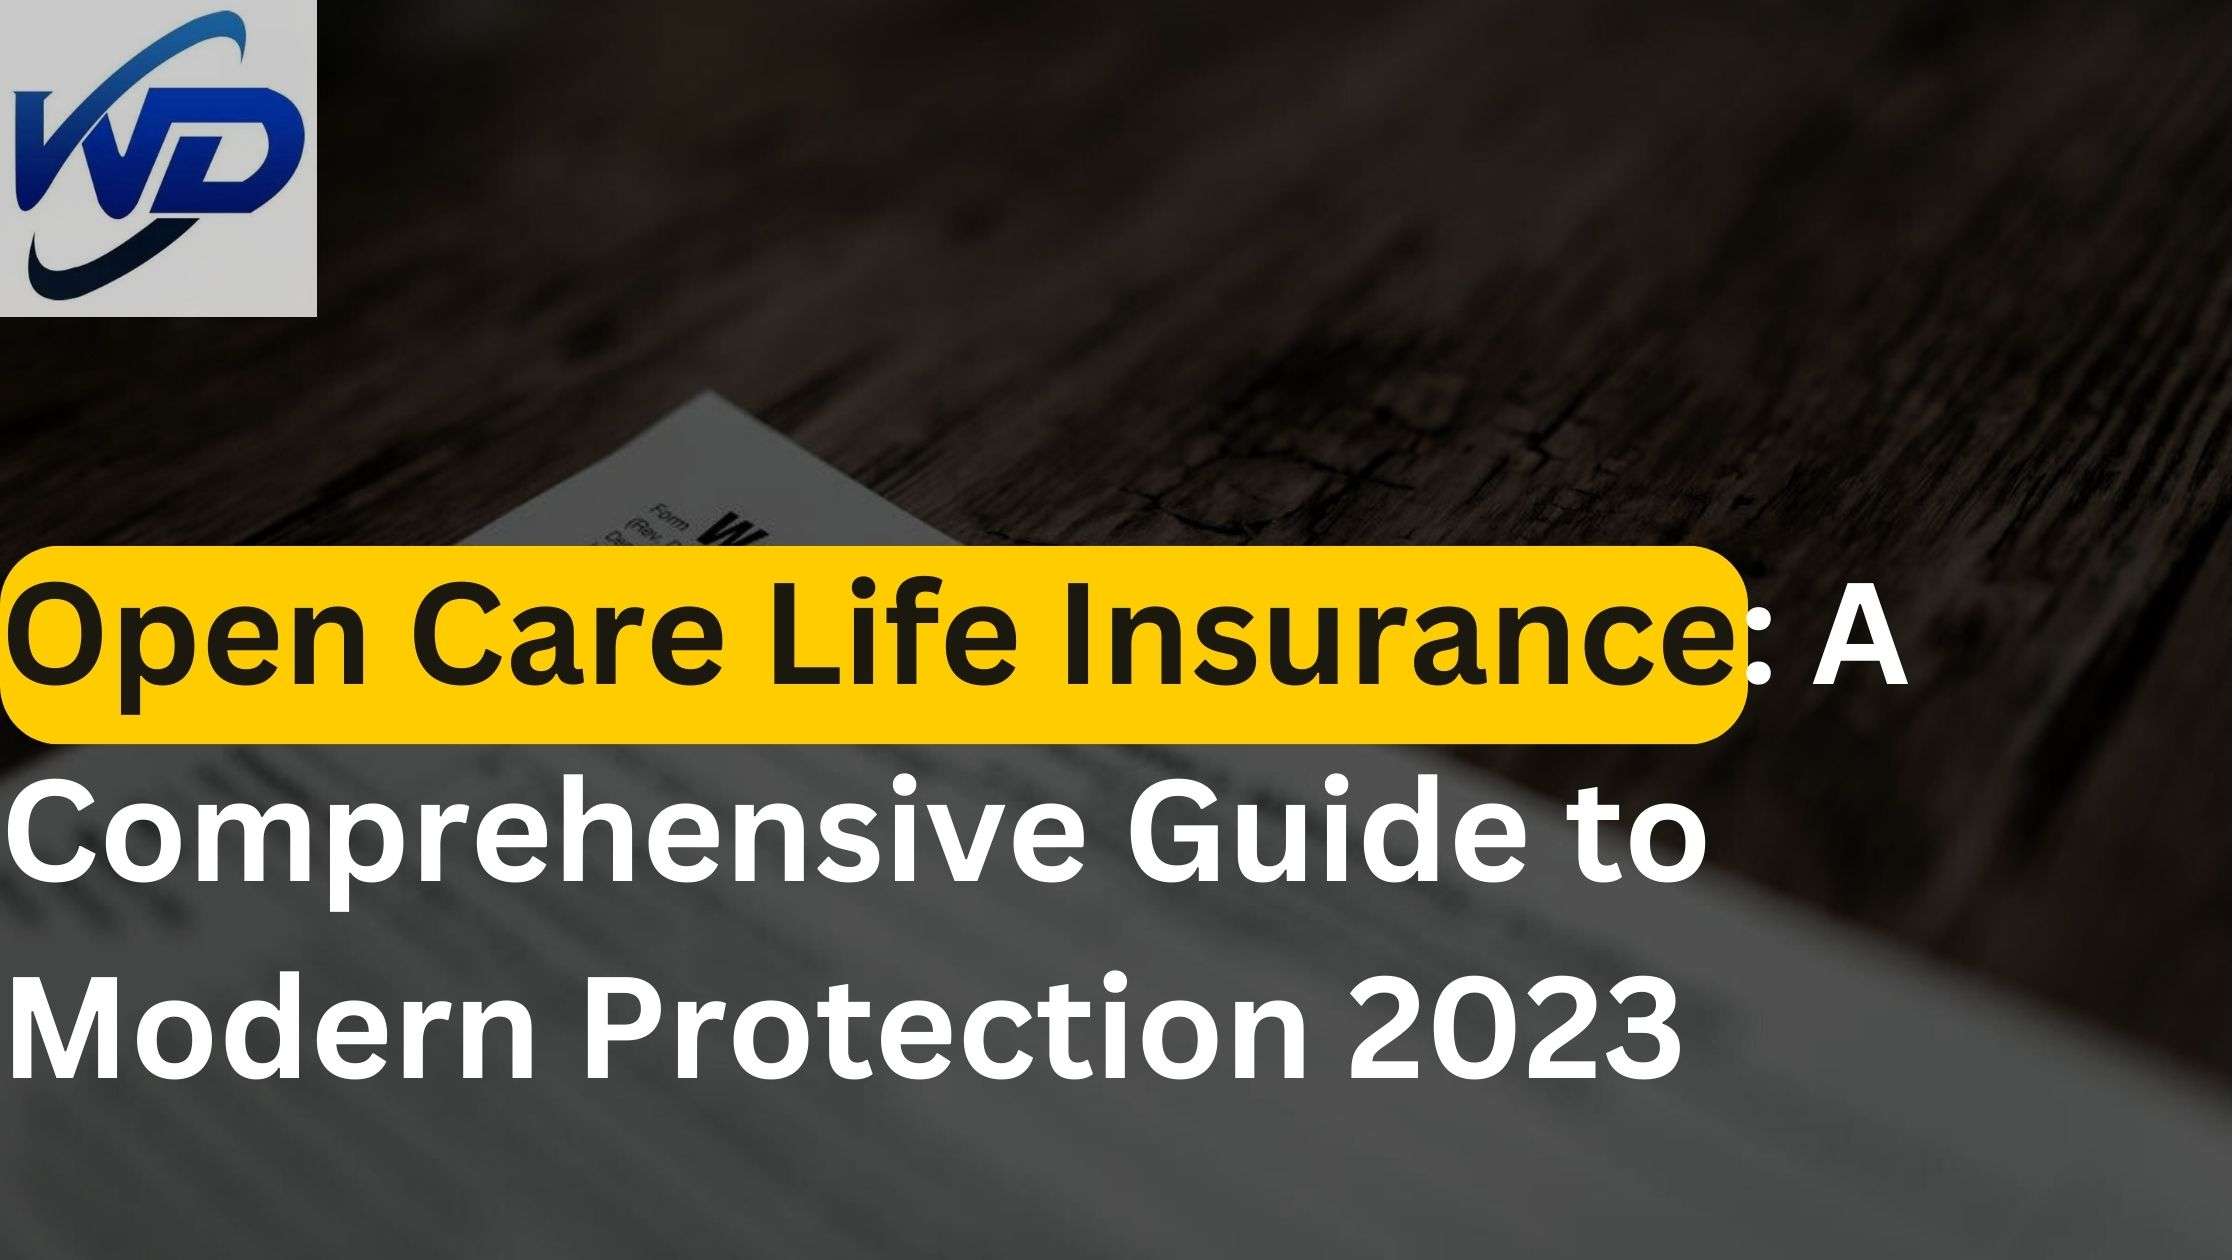 Open Care Life Insurance: A Comprehensive Guide to Modern Protection 2023